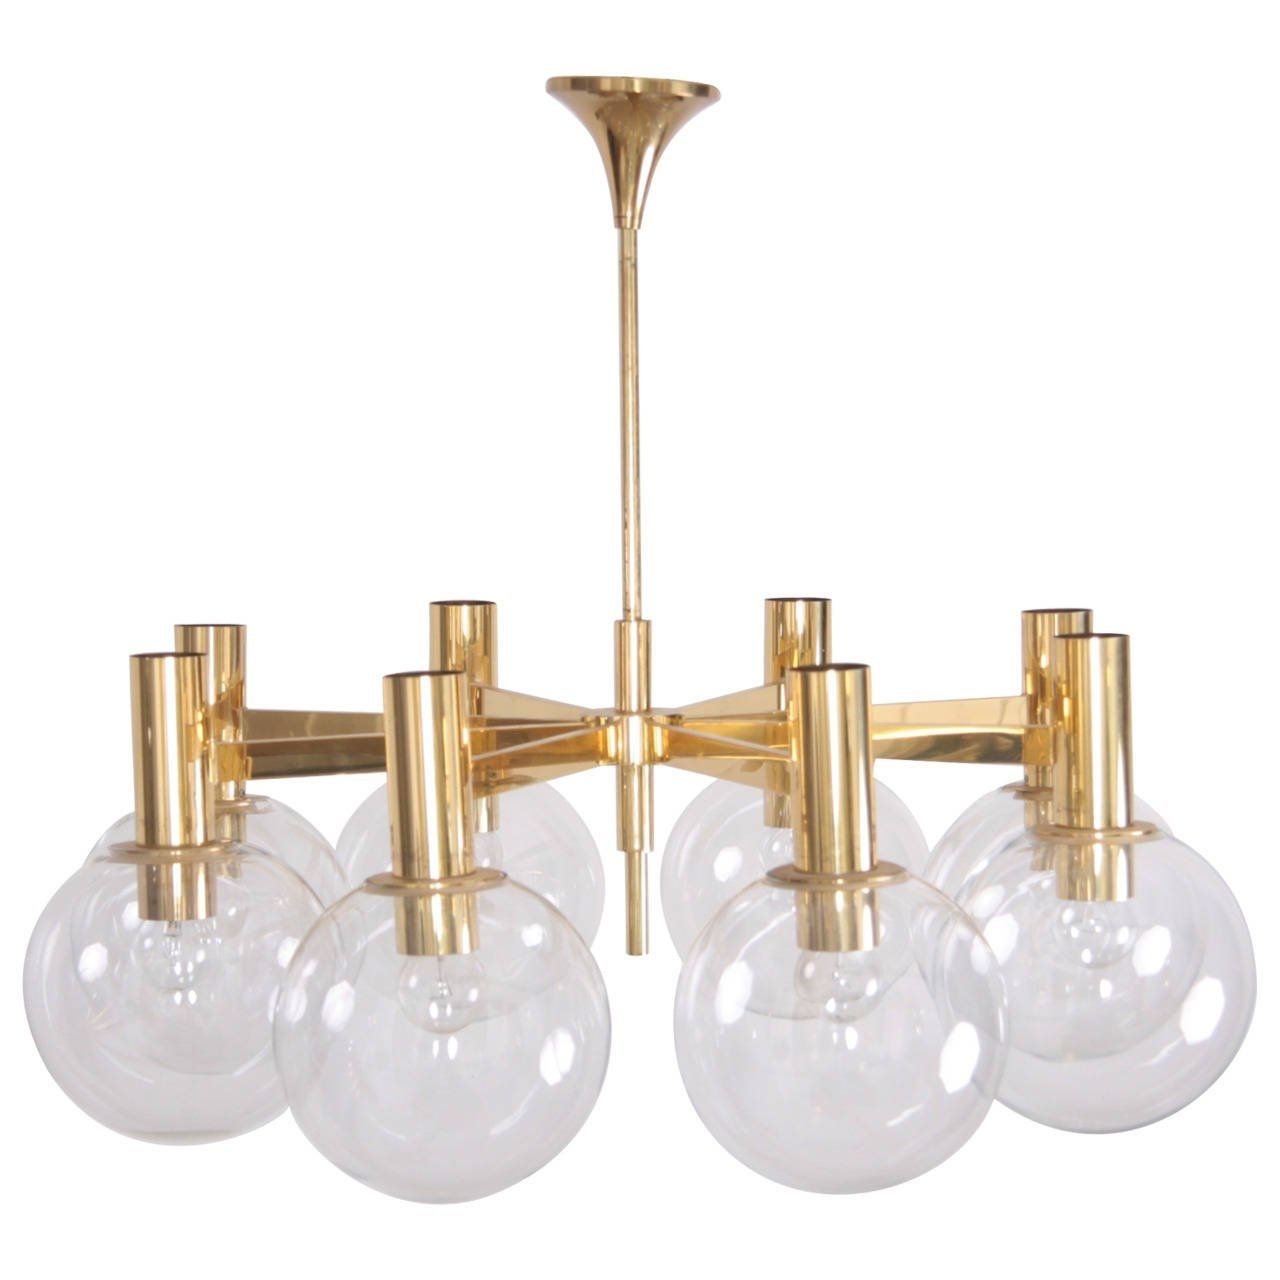 Extra Large Brass Chandelier With Eight Arms Ott International Pertaining To Large Brass Chandelier (View 5 of 15)